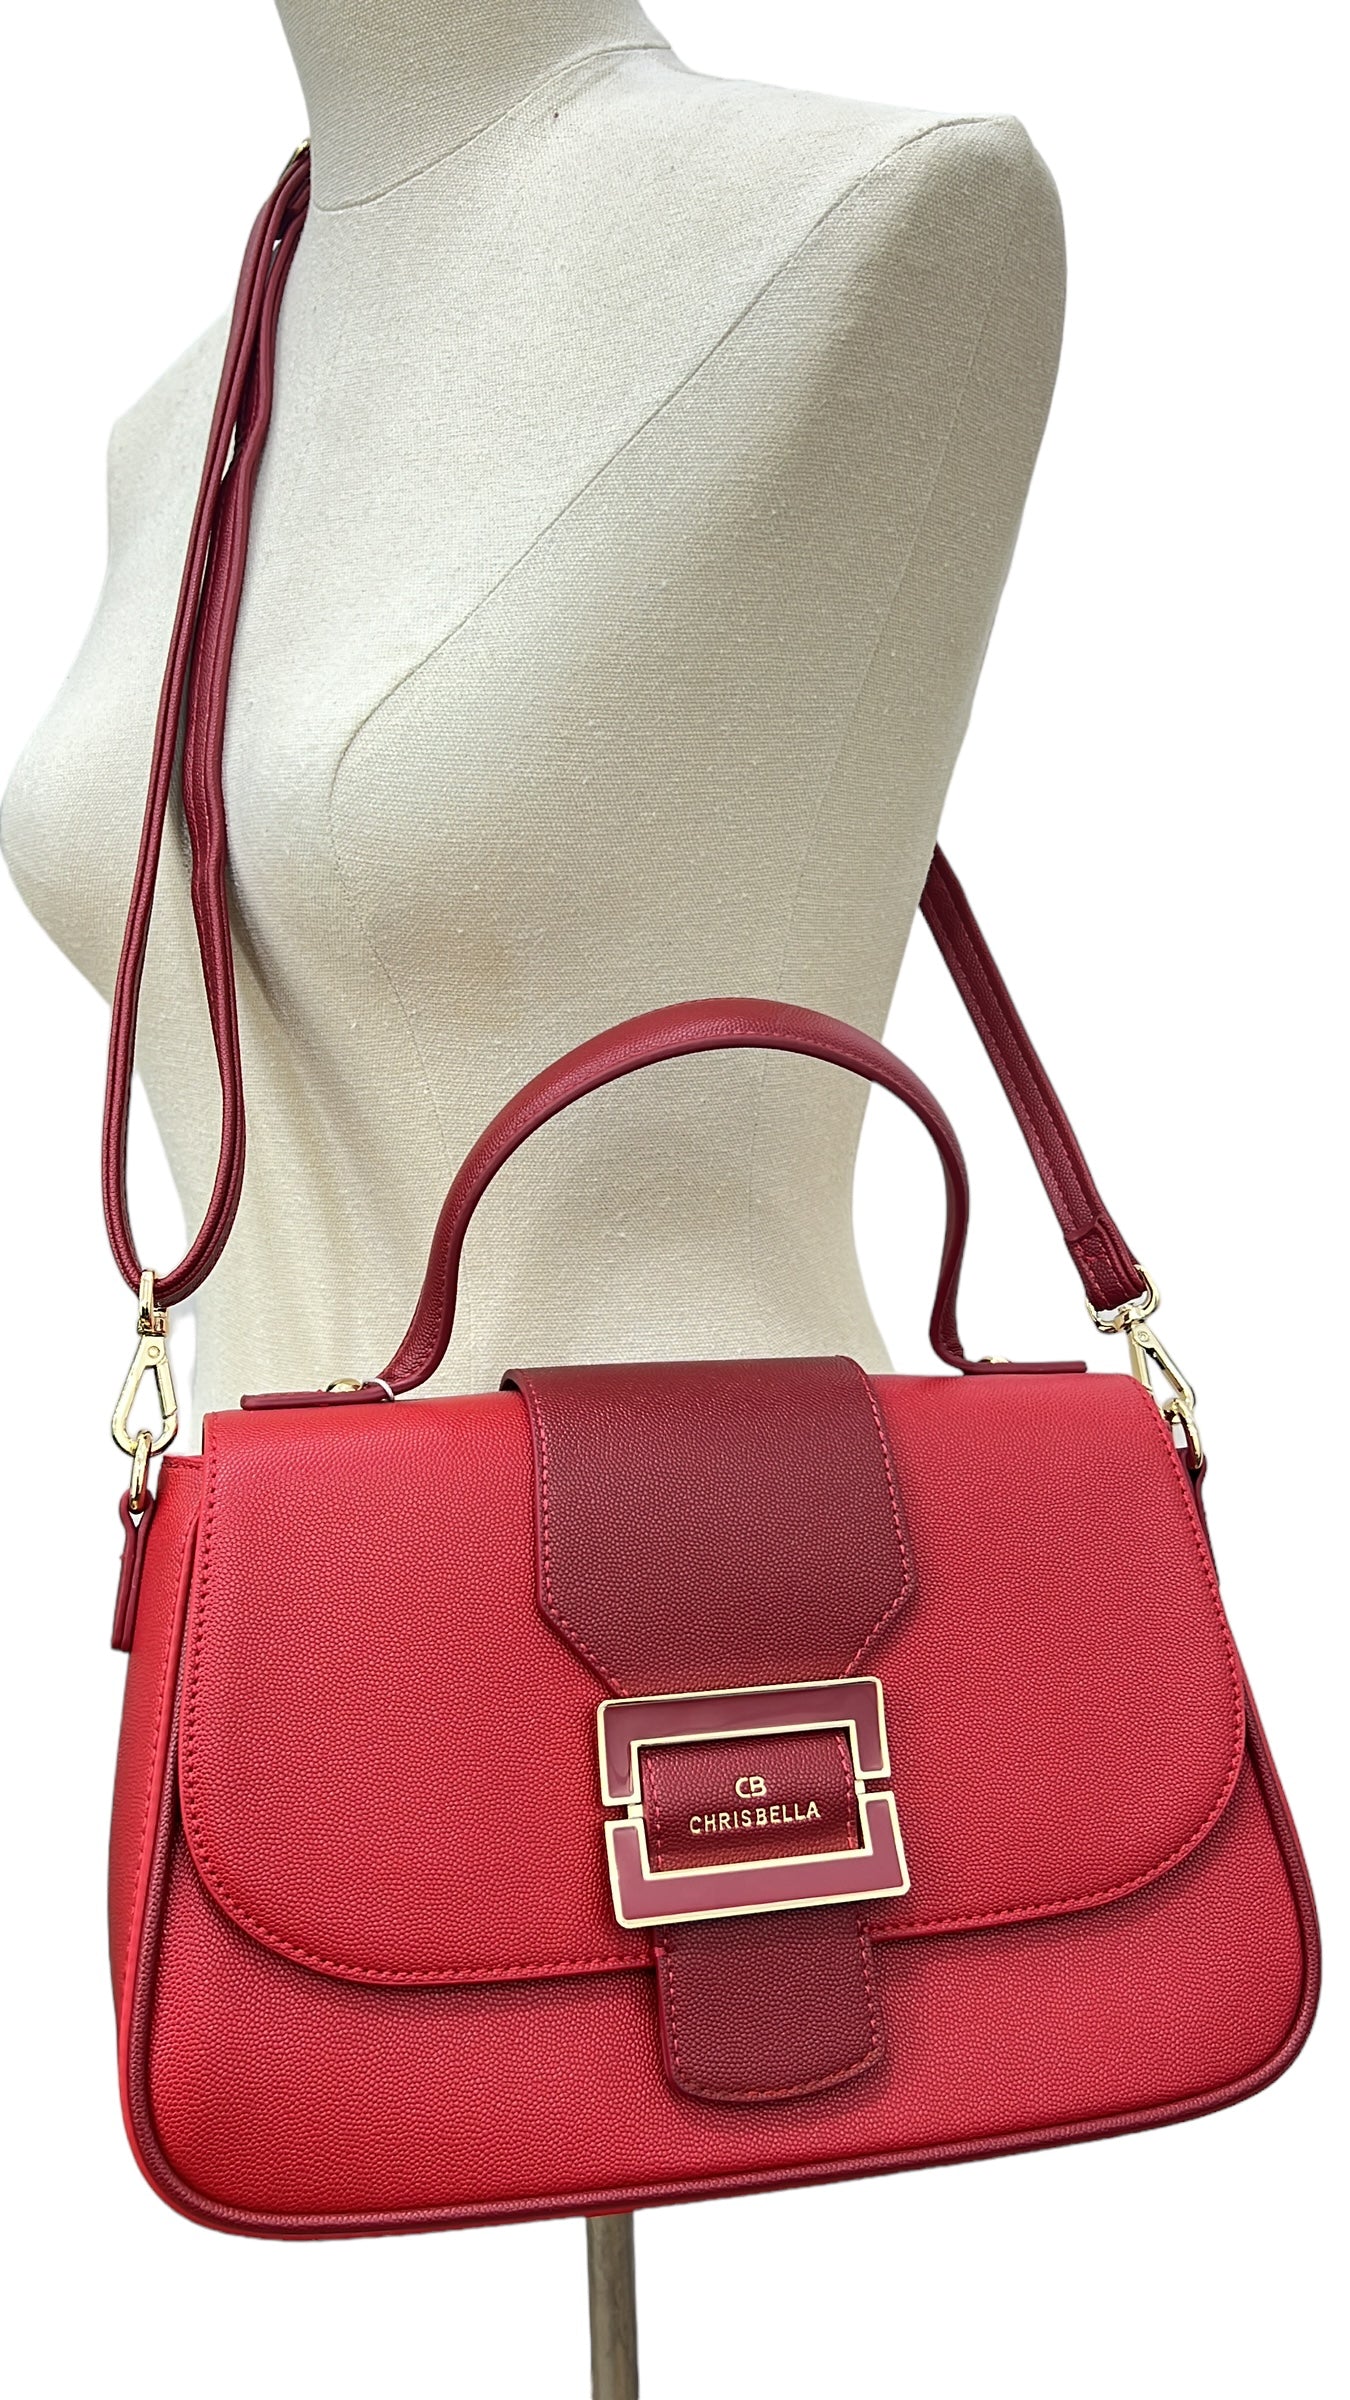 CHRISBELLA TEXTURED BUCKLE DETAIL TWO-TONE BAG IN RED